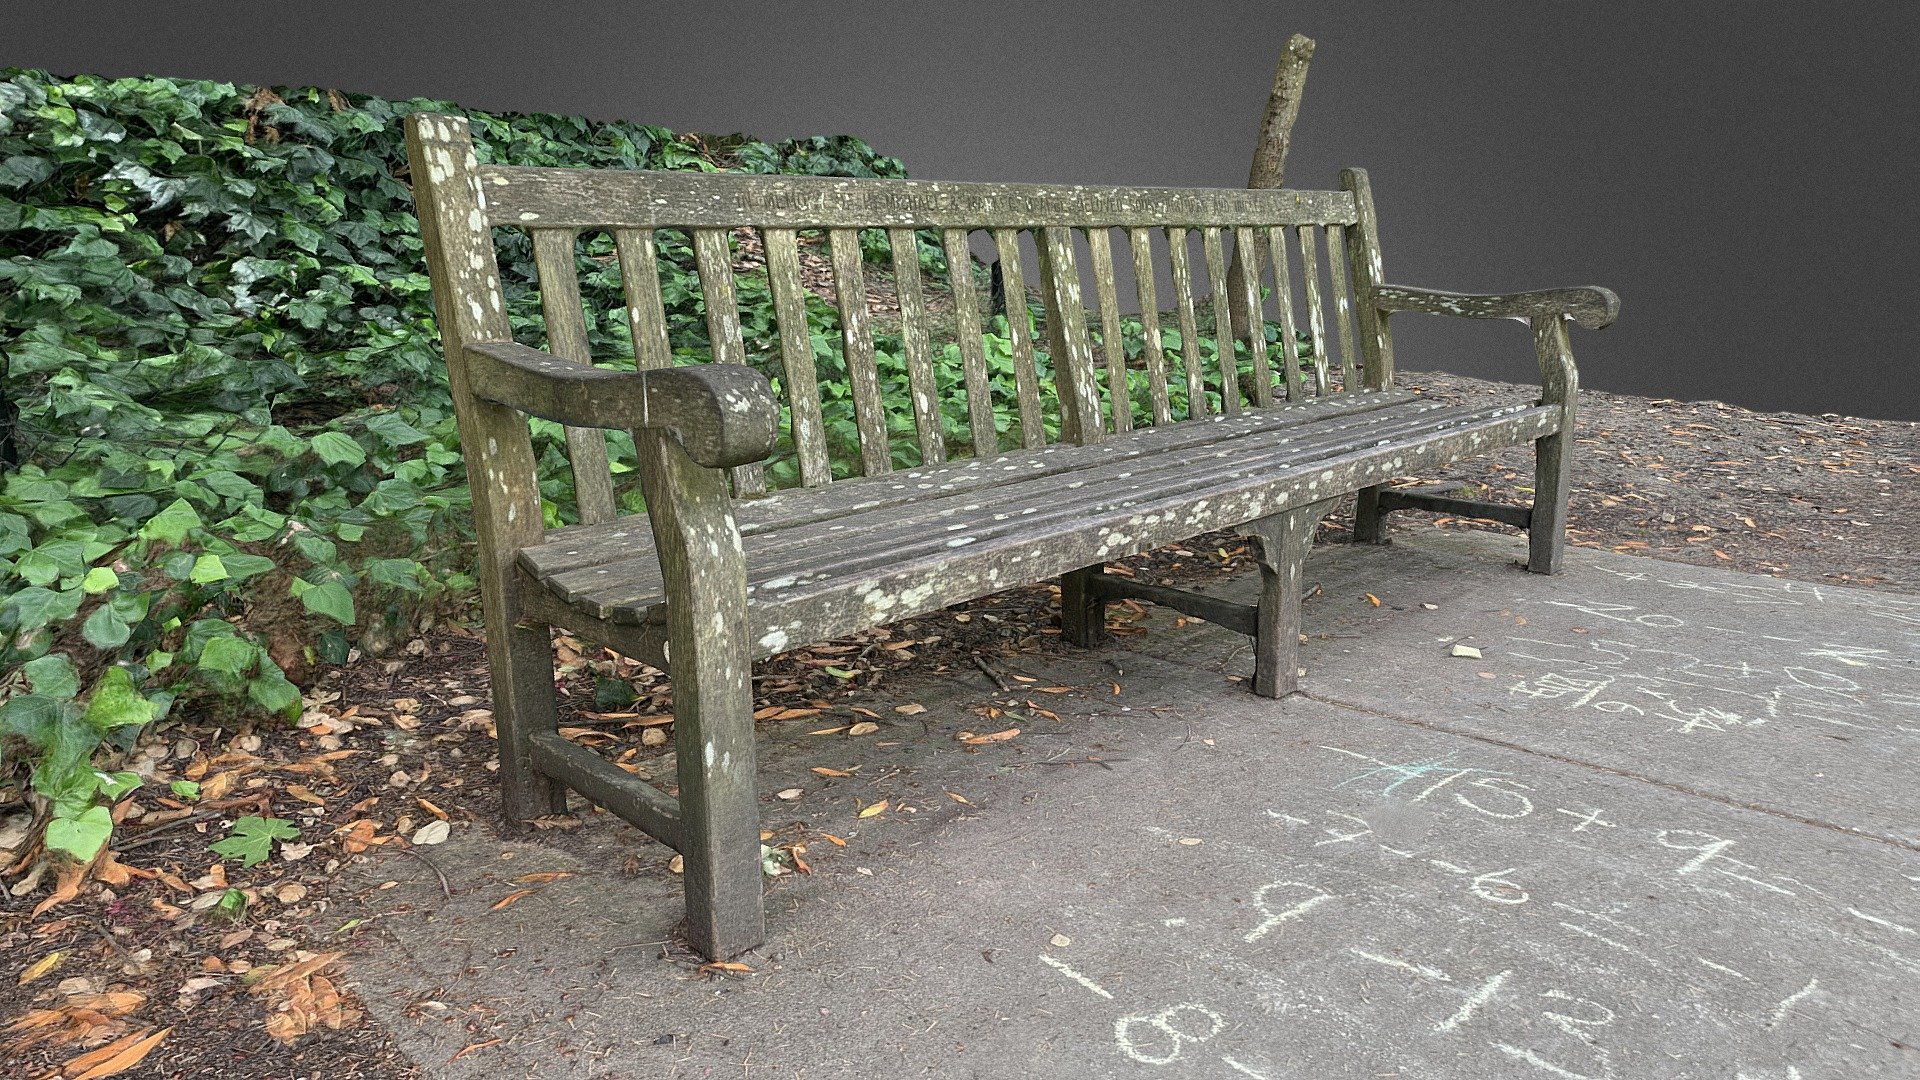 Bench at a local park. Photographed with an iPhone 10 and processed in Reality Capture. 

164 Total Images 3d model